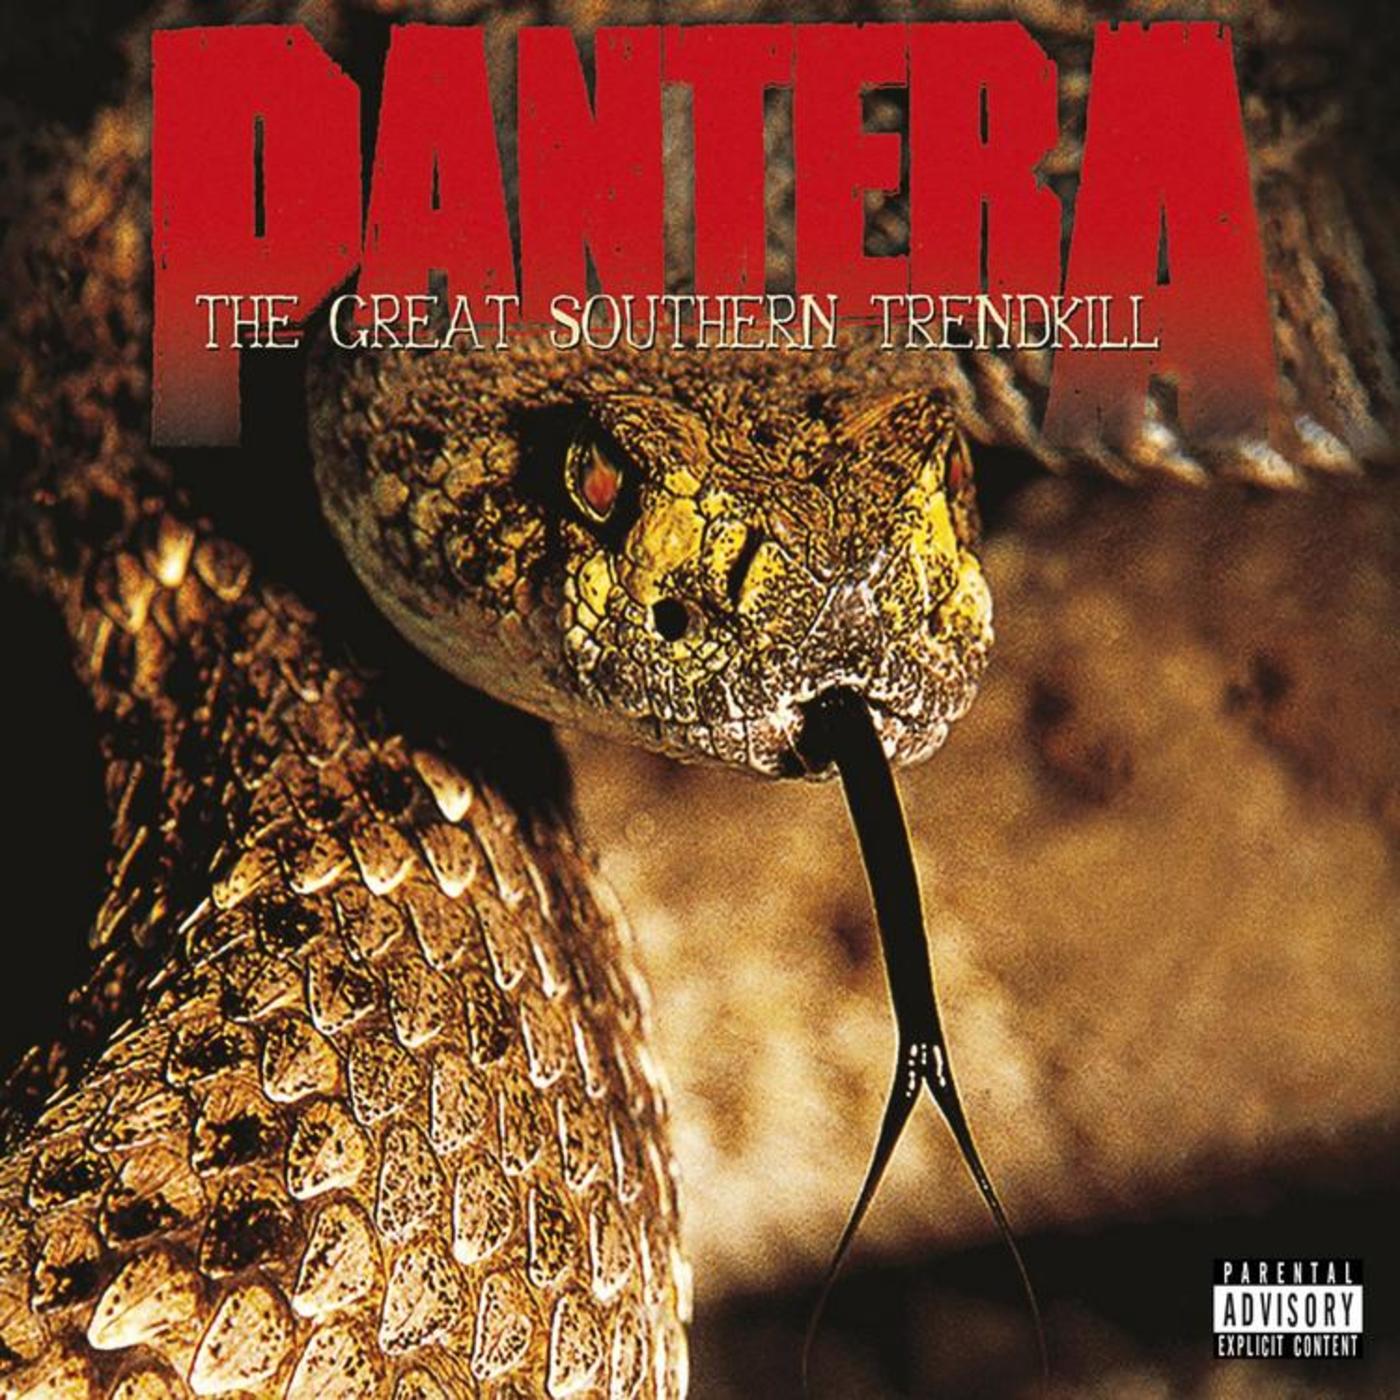 The Great Southern Trendkill (20th Anniversary Edition)